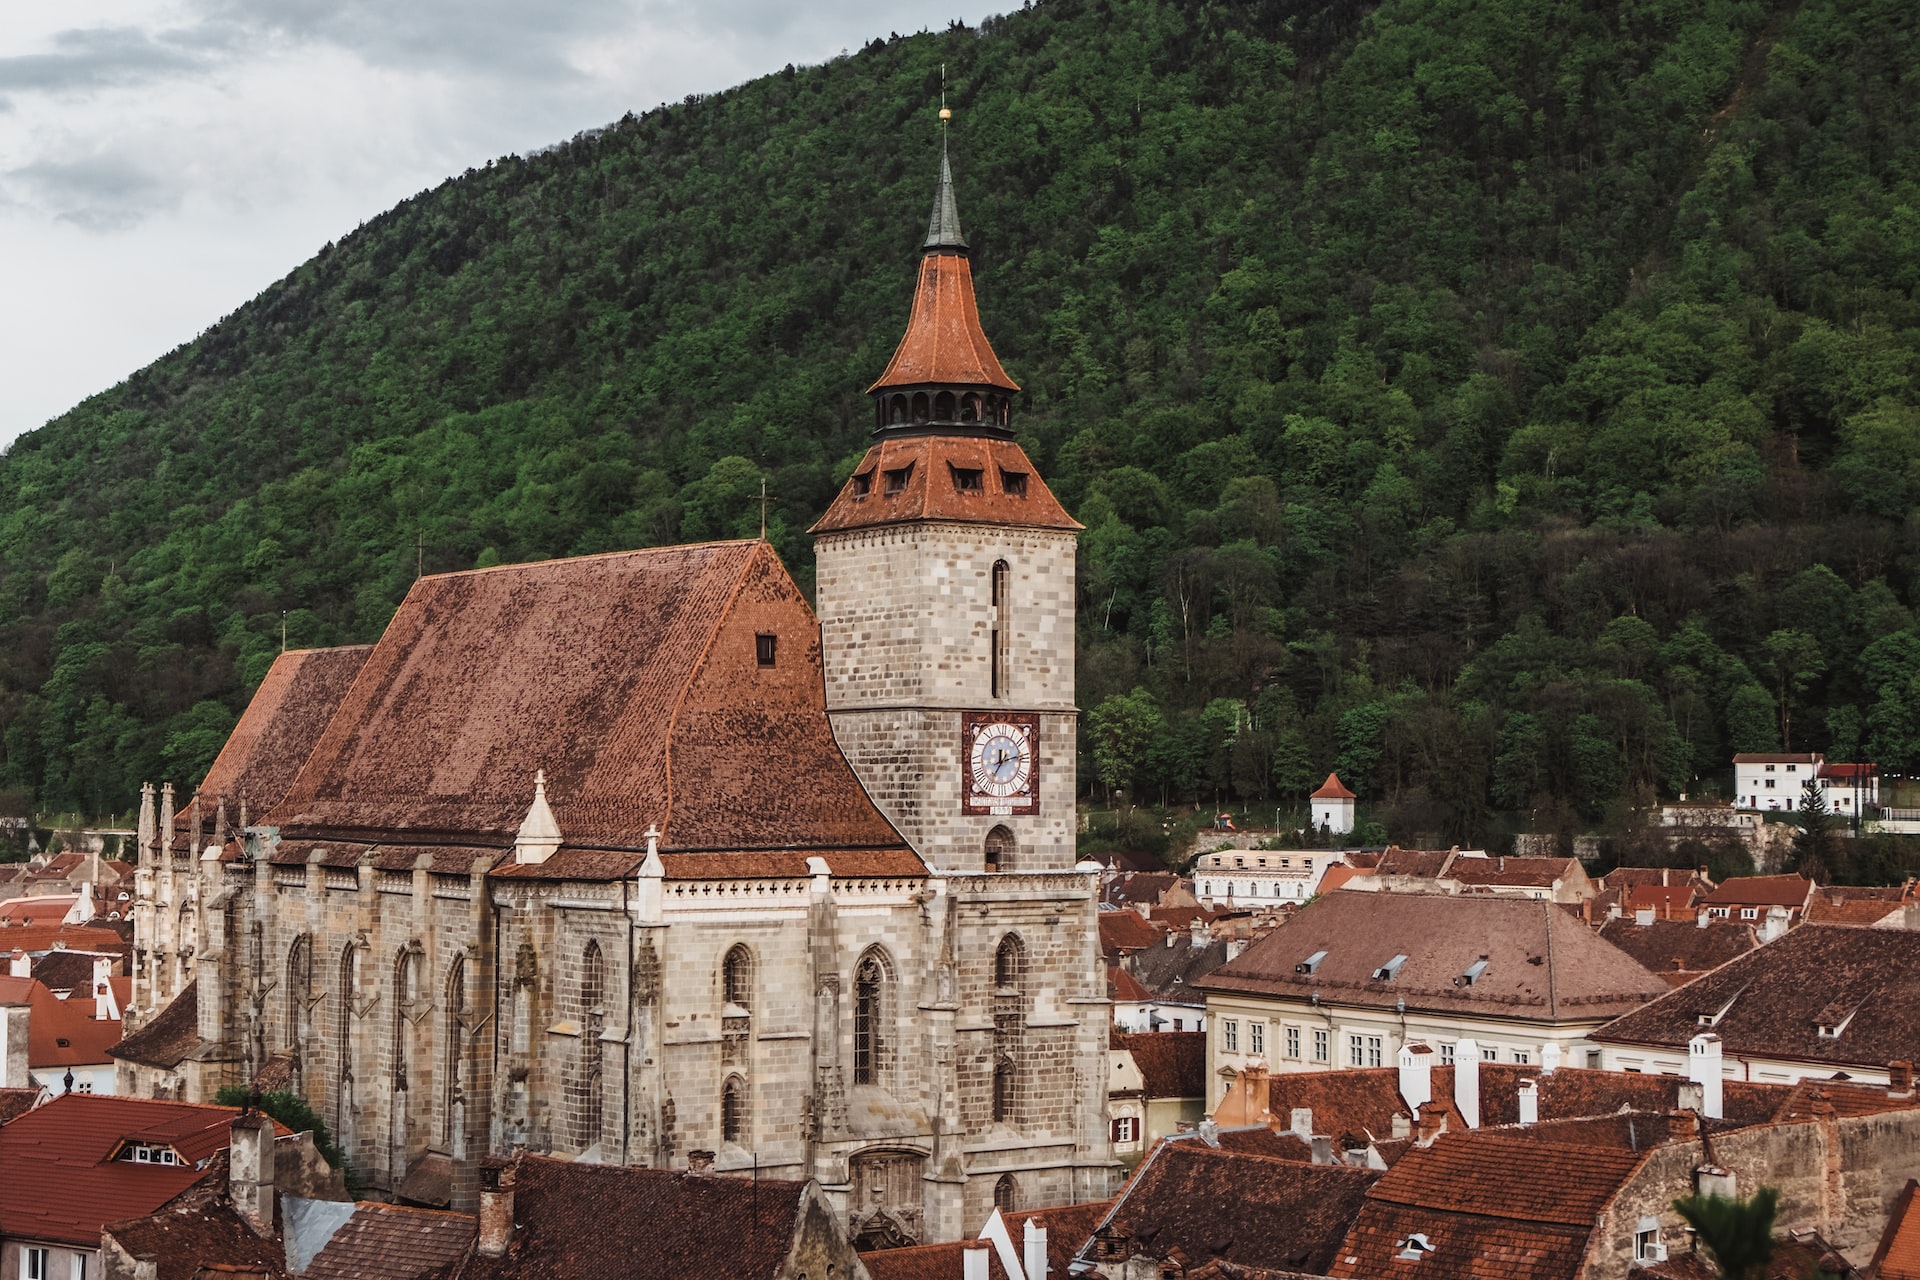 The Black Church – a building you will notice from anywhere in Brasov